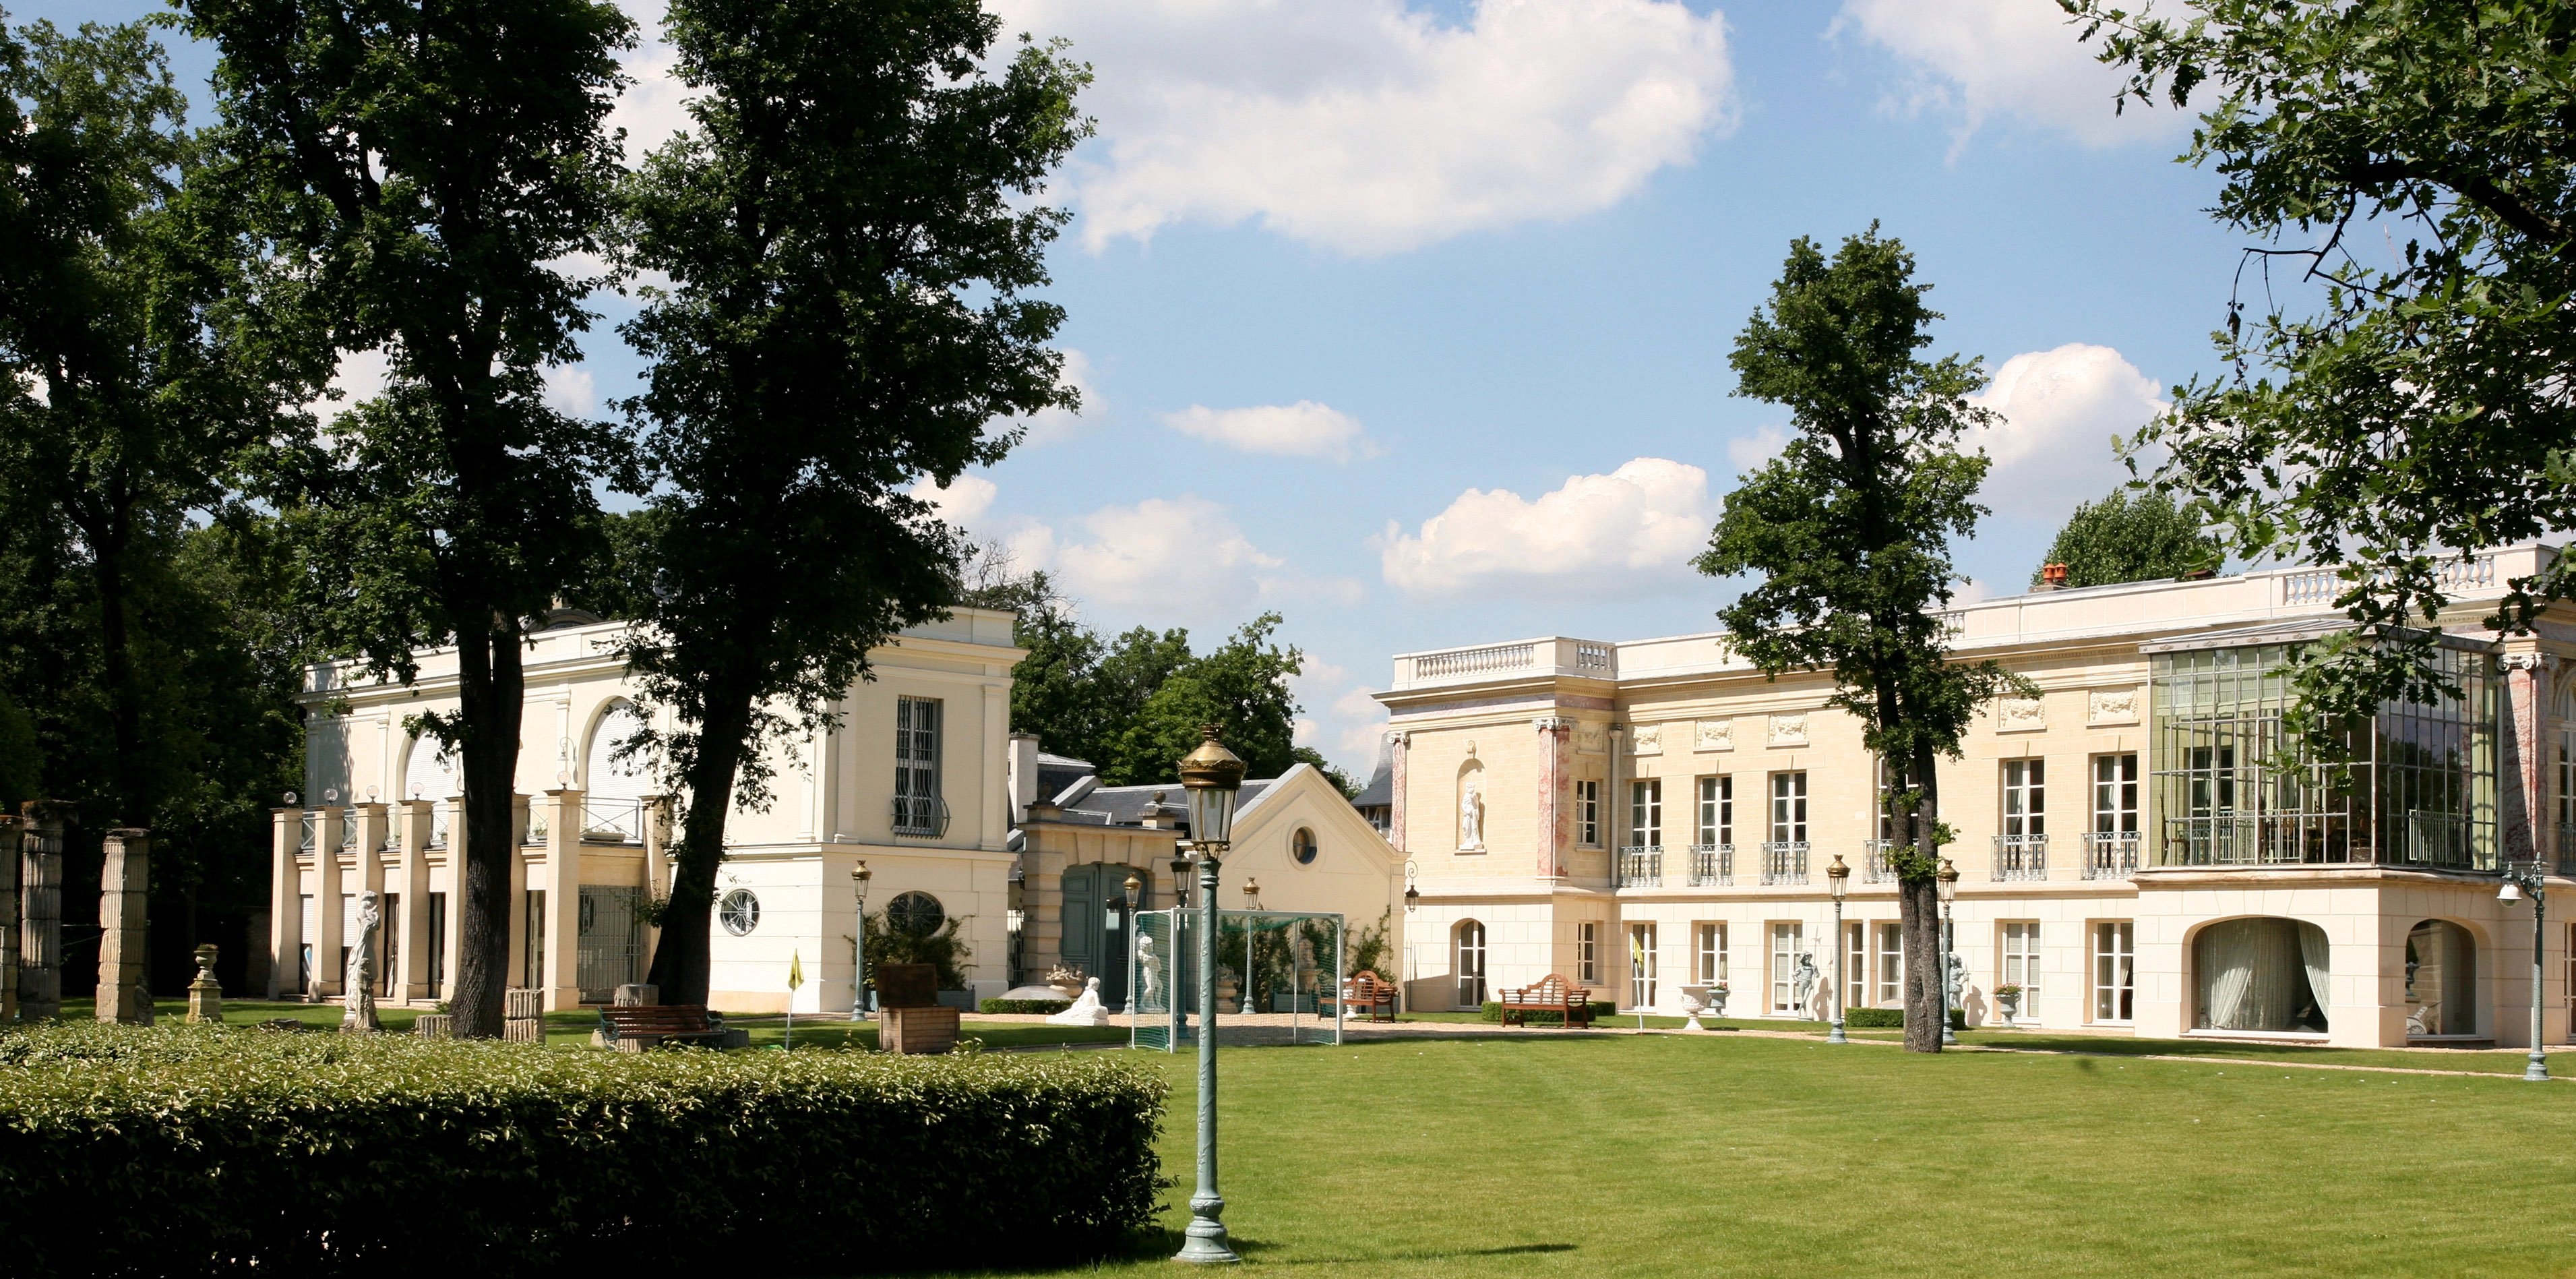 A sublime Palais inspired by Grand Trianon Palace, 20 min from Paris_1345